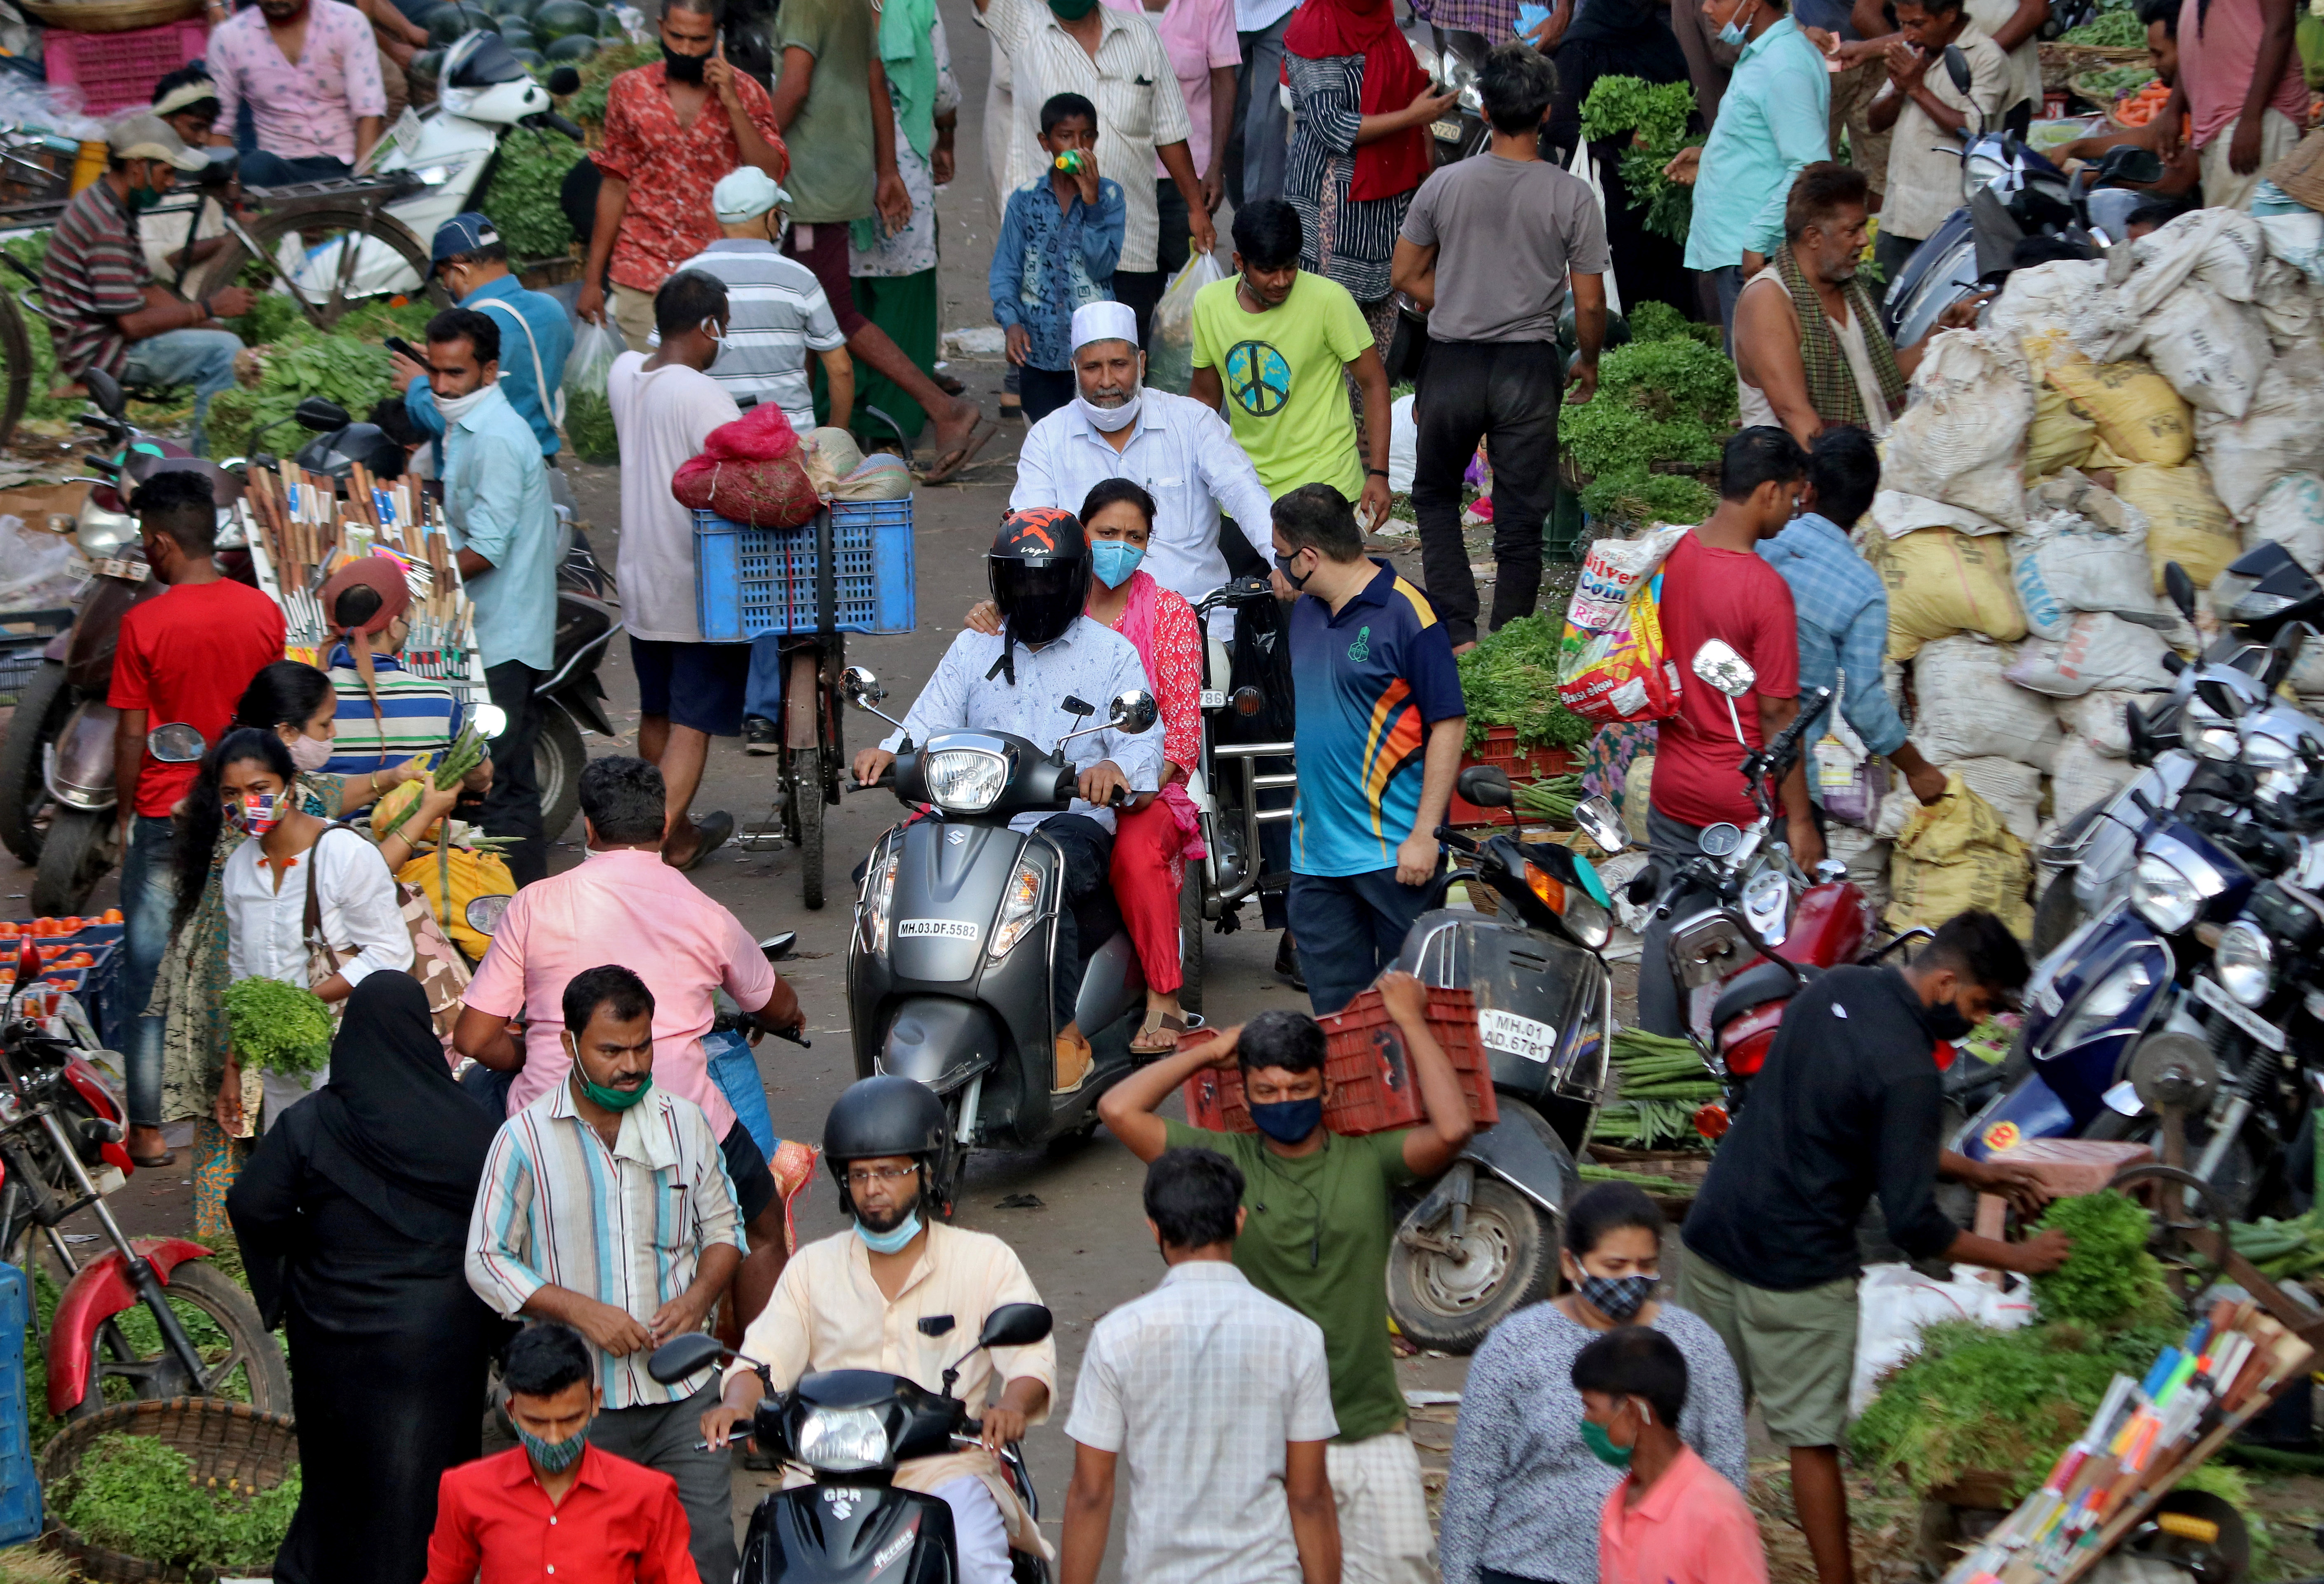 People shop at a crowded vegetable market amidst the spread of the coronavirus disease (COVID-19) in Mumbai